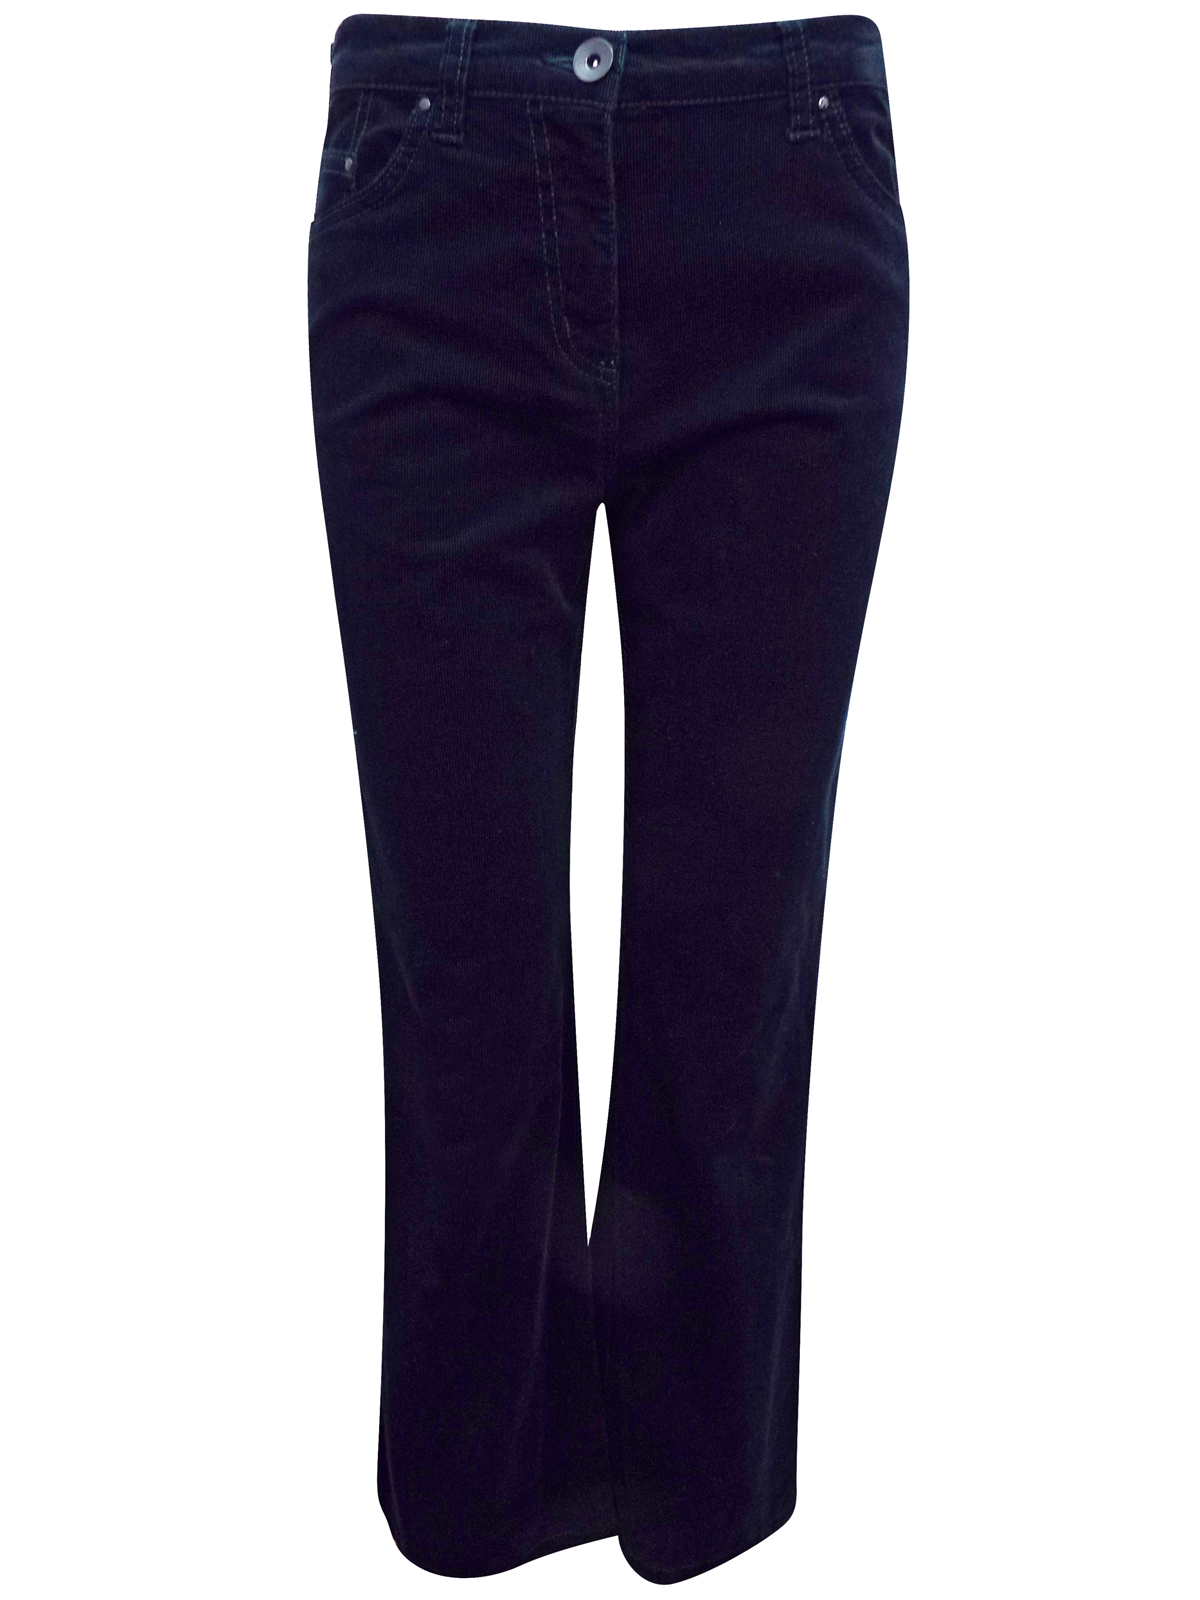 Marks and Spencer - - M&5 NAVY Cotton Rich Cord Bootcut Trousers - Size ...